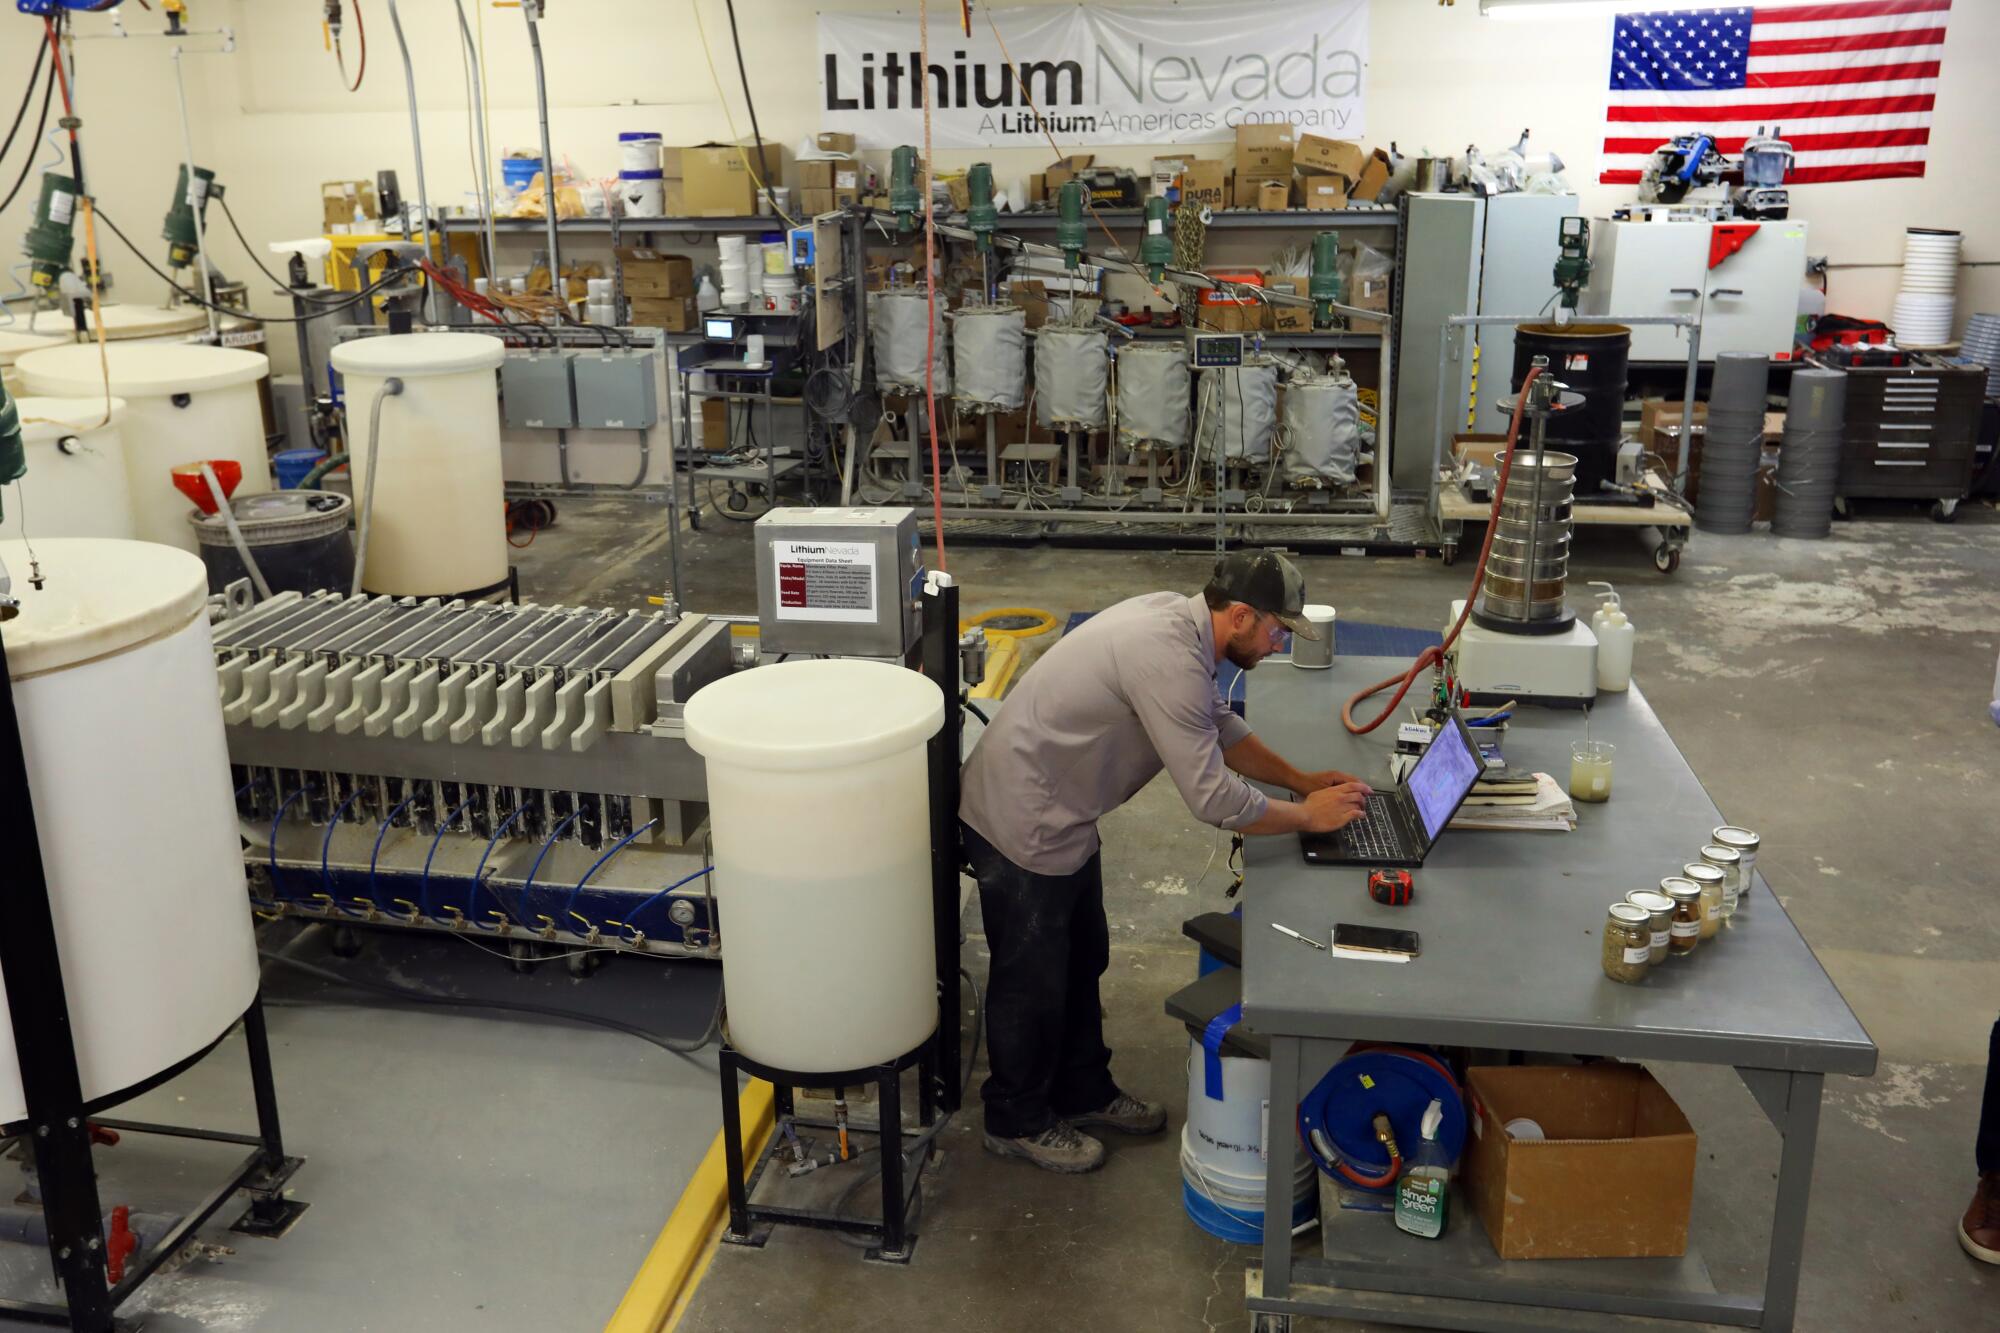 A technician at Lithium Americas bends over a laptop amid equipment in a large lab. 